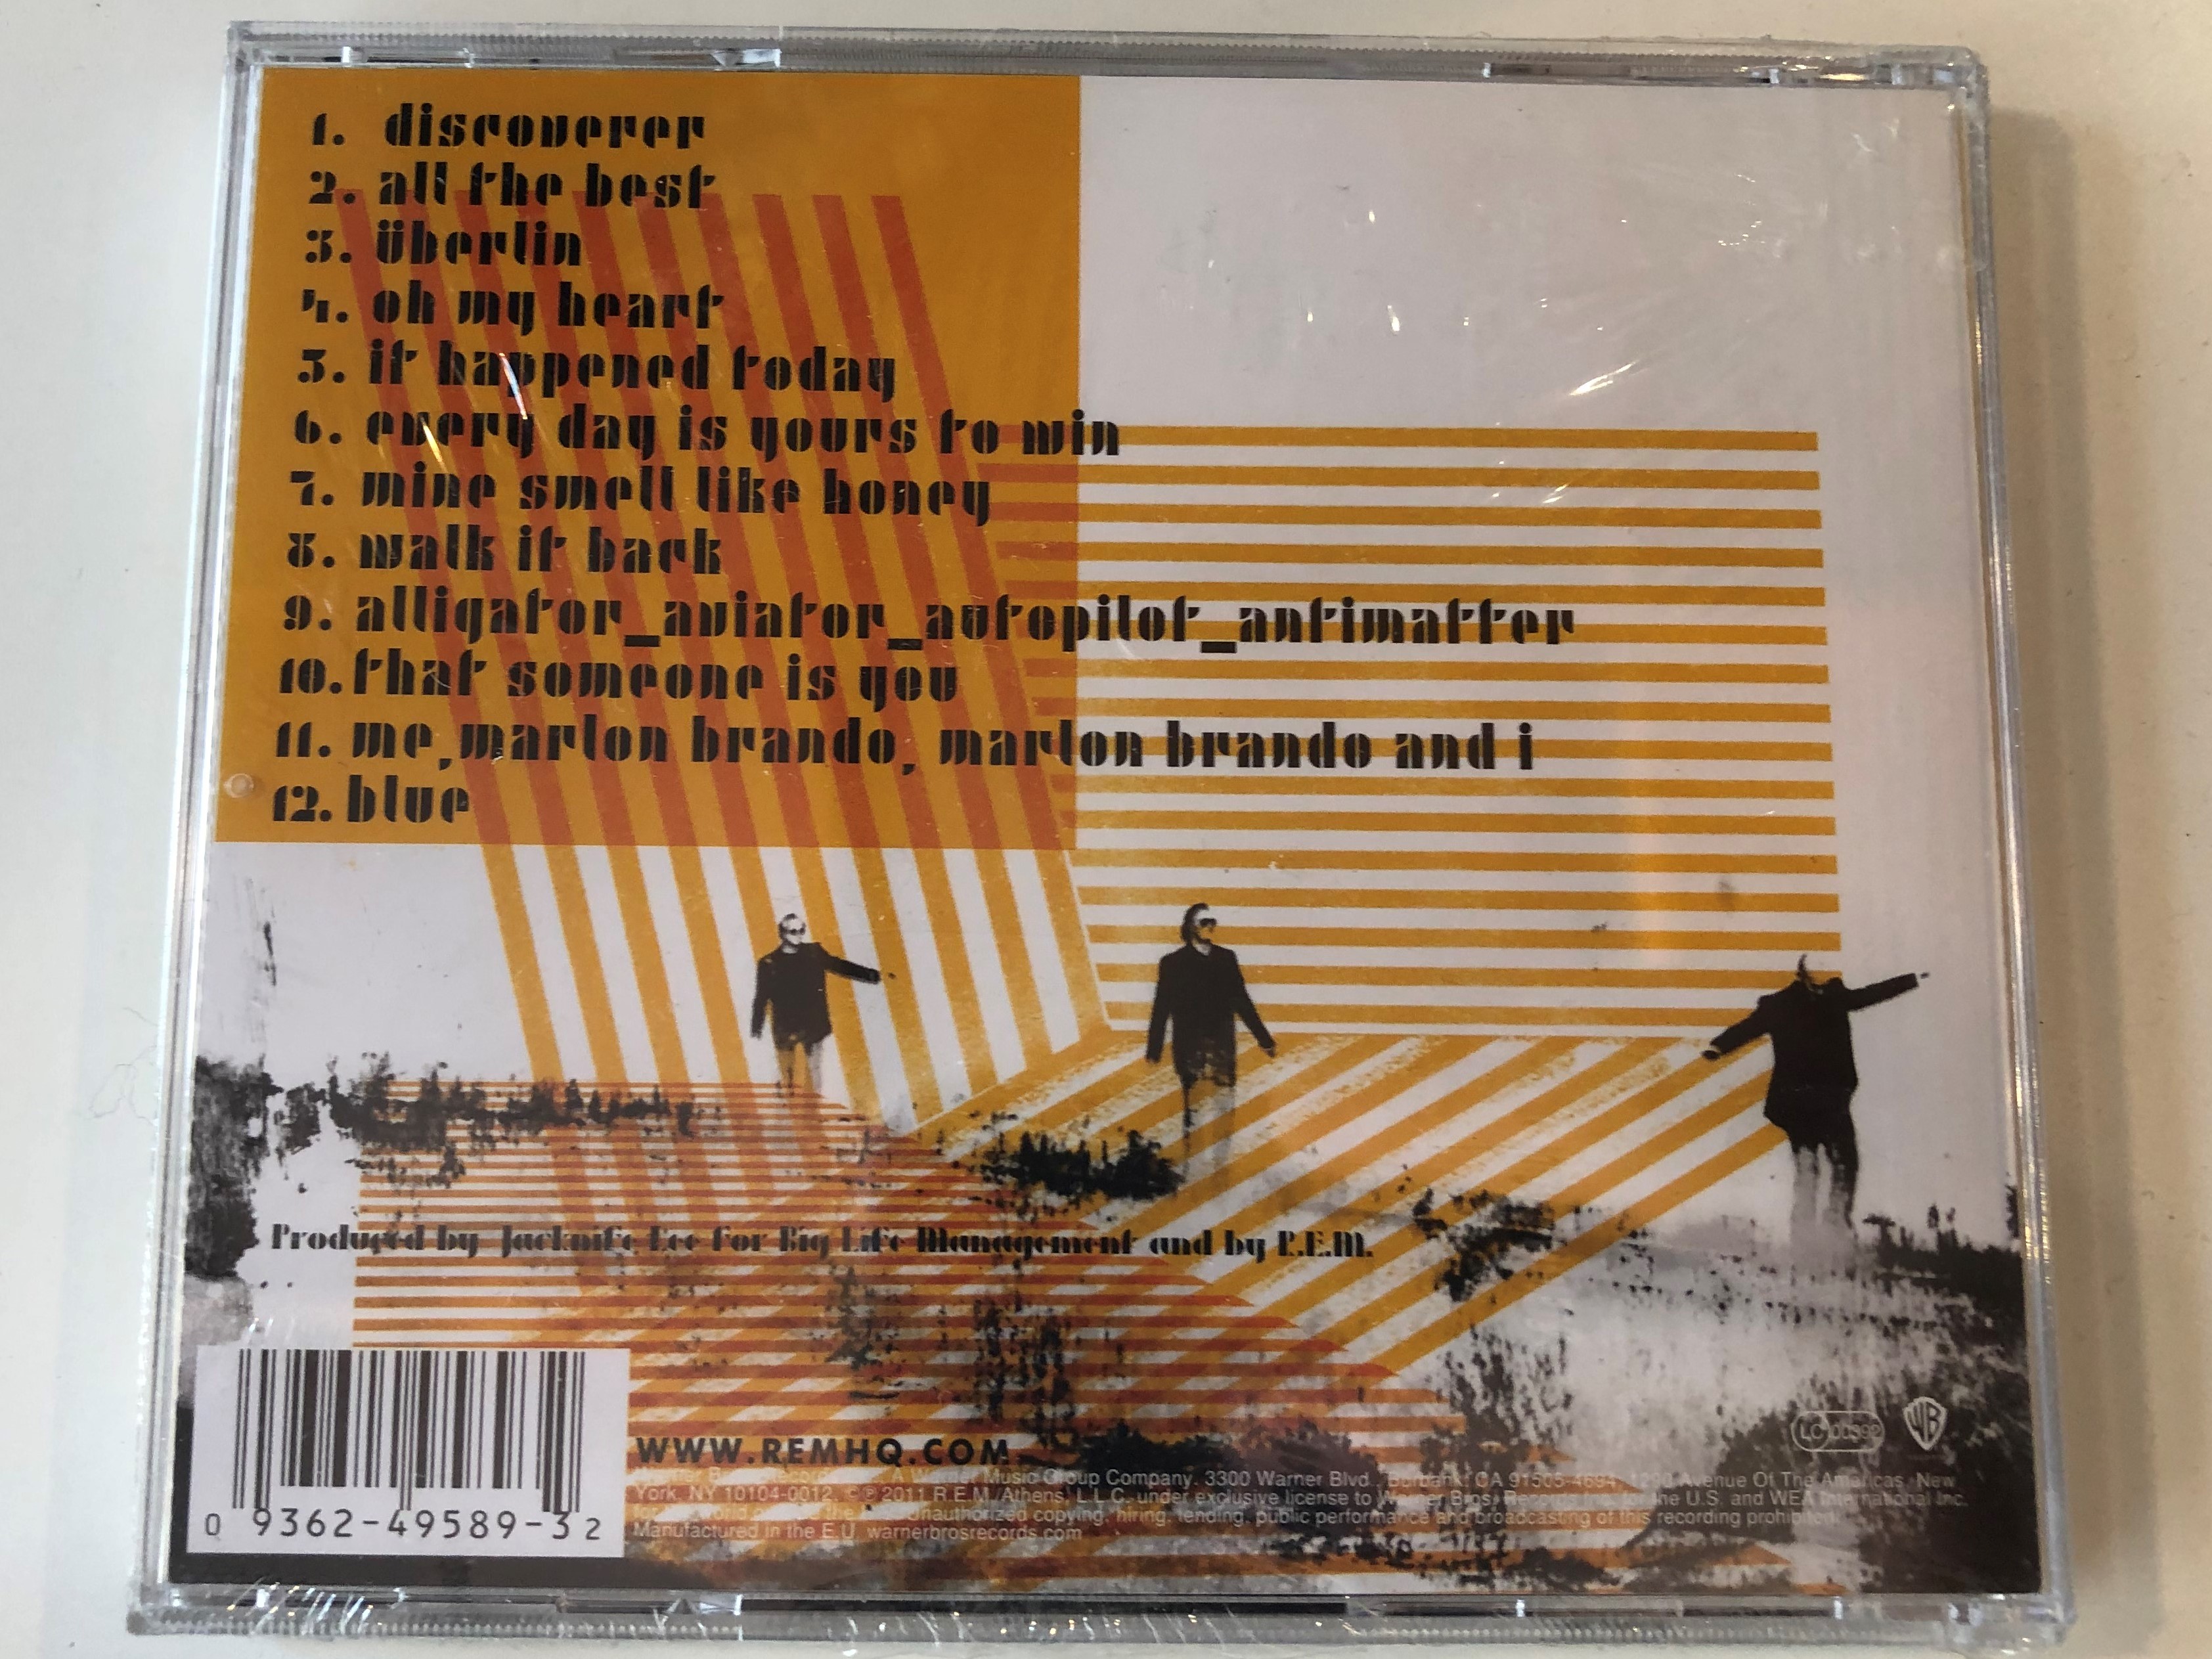 r.e.m.-collapse-into-now-the-new-album-includes-discoverer-berlin-oh-my-heart-and-mine-smell-like-honey-warner-bros.-records-audio-cd-2011-09362-49589-32-2-.jpg